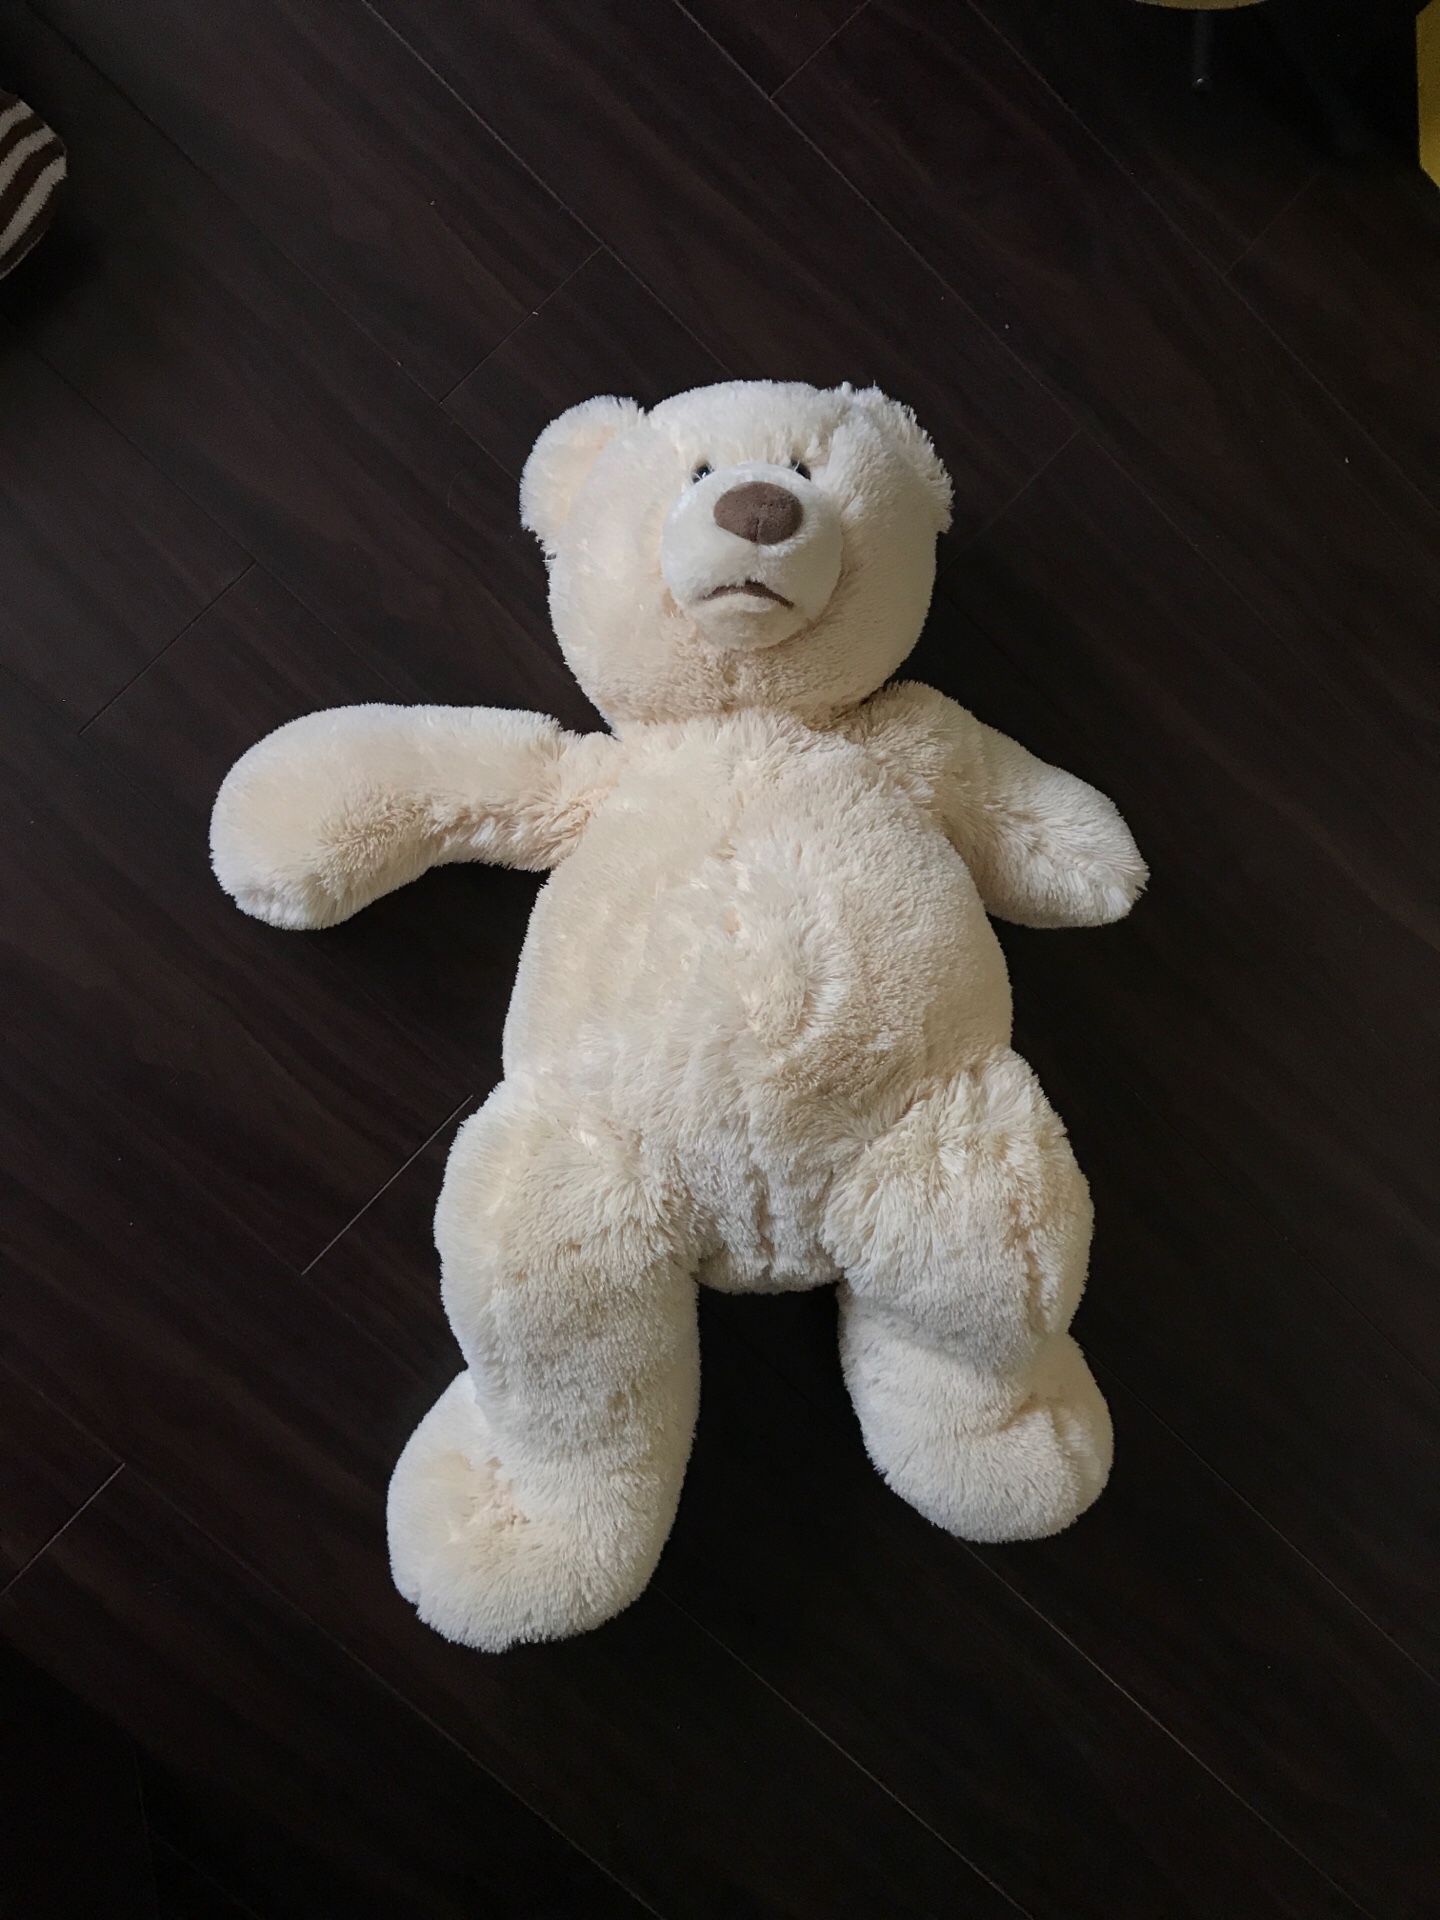 Bear stuffed animal, put in closet as soon as received